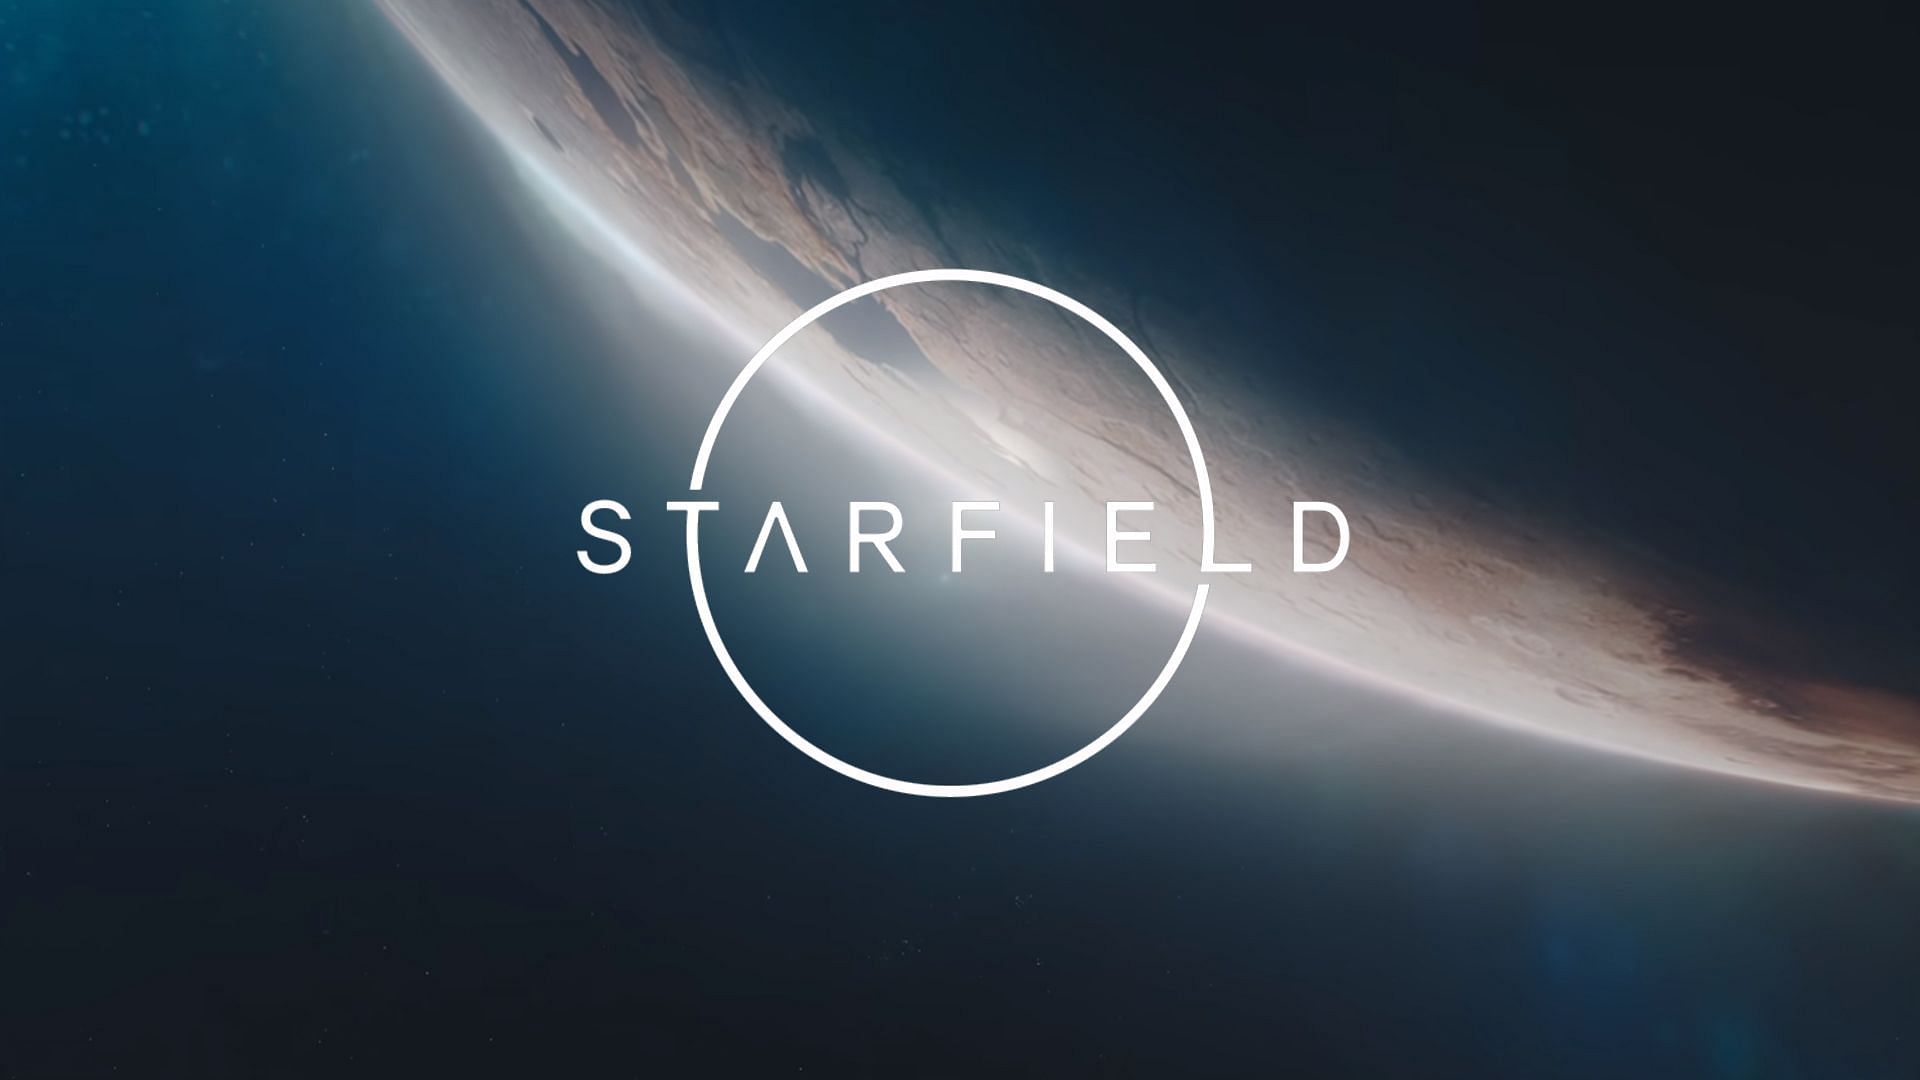 Starfield is one of the most awaited games of 2022 (Image via Bethesda)